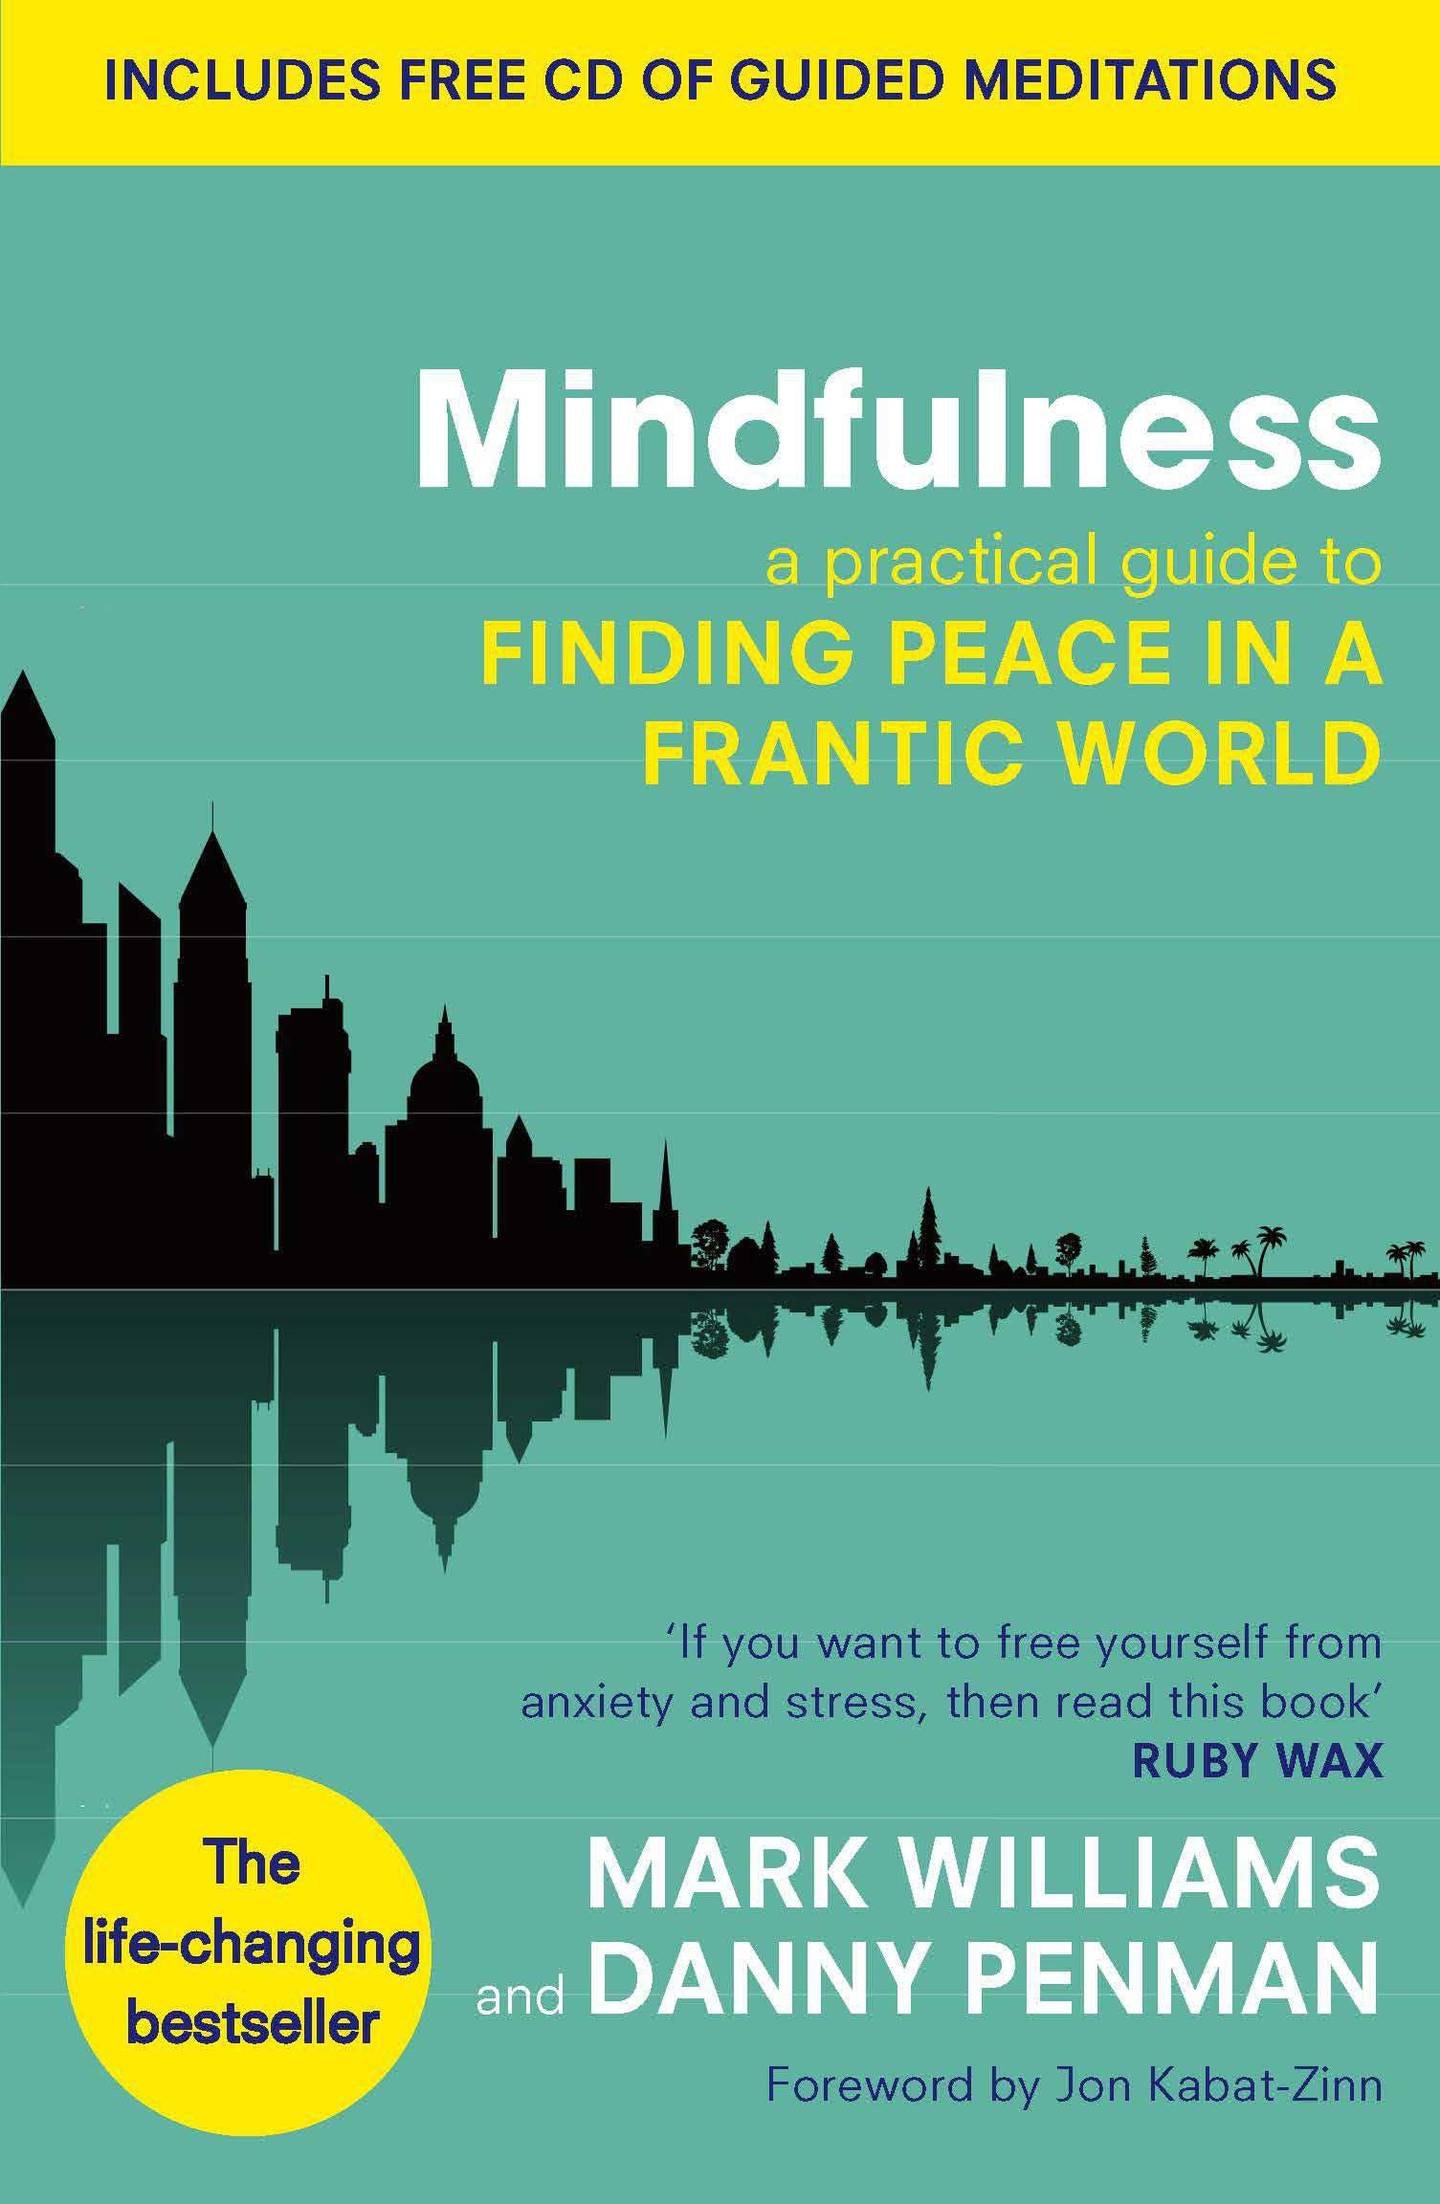 MindfulnessAN EIGHT-WEEK PLAN FOR FINDING PEACE IN A FRANTIC WORLD By MARK WILLIAMS and DANNY PENMAN. Courtesy Penguin Random House